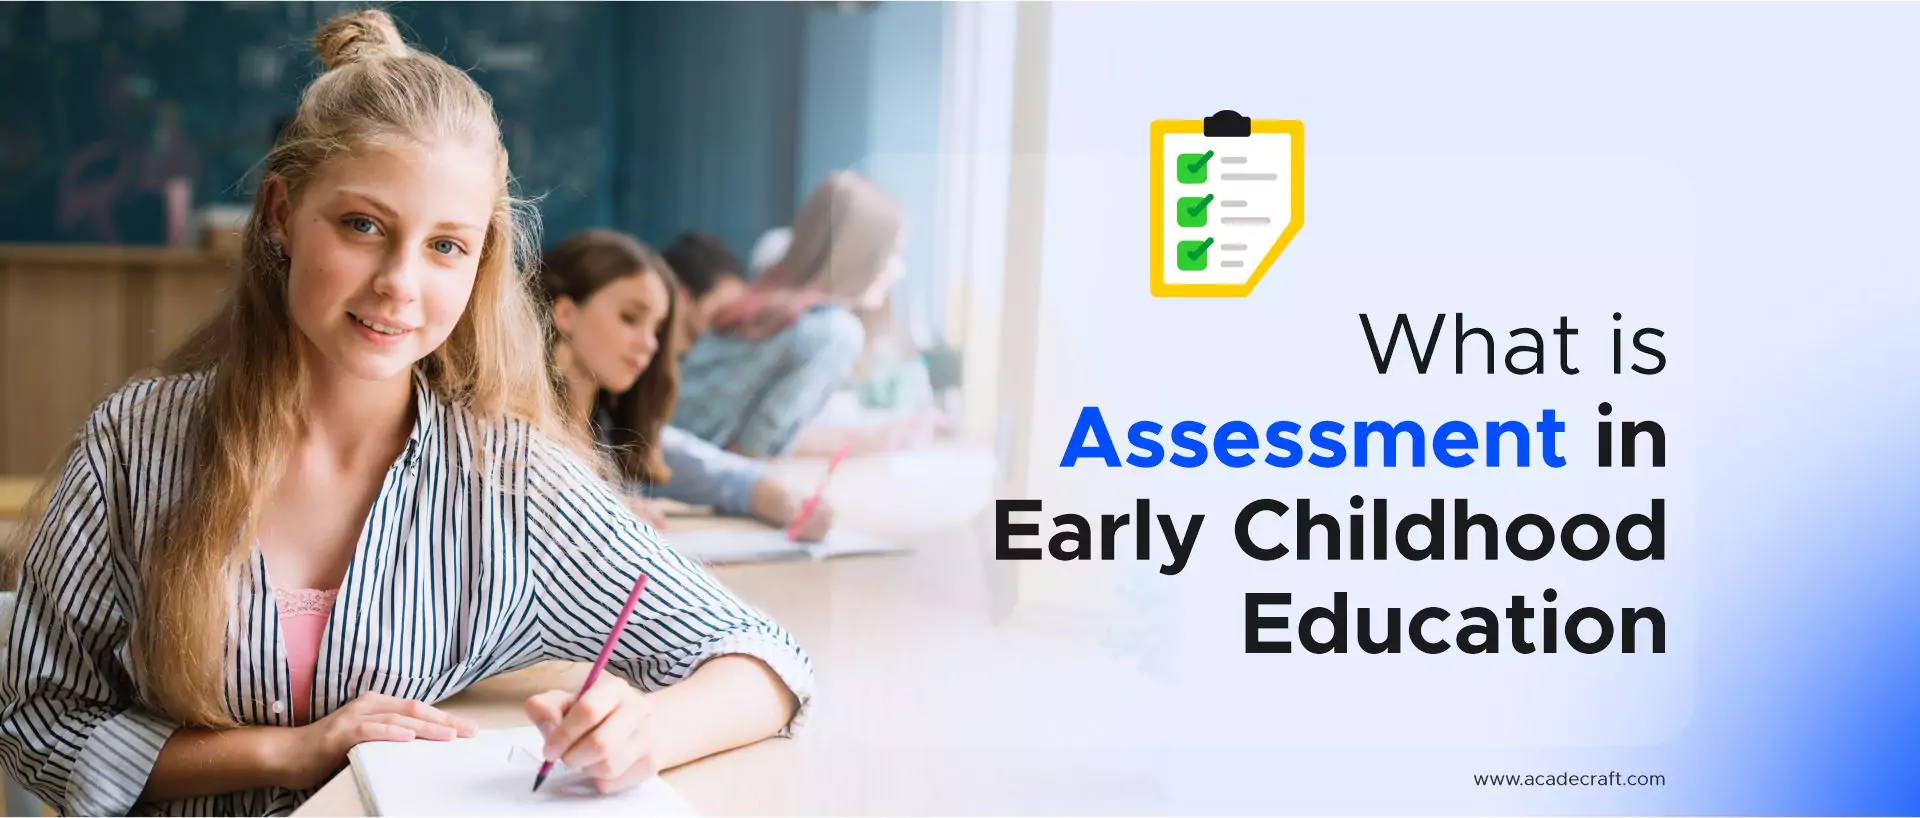 What is Assessment in Early Childhood Education?